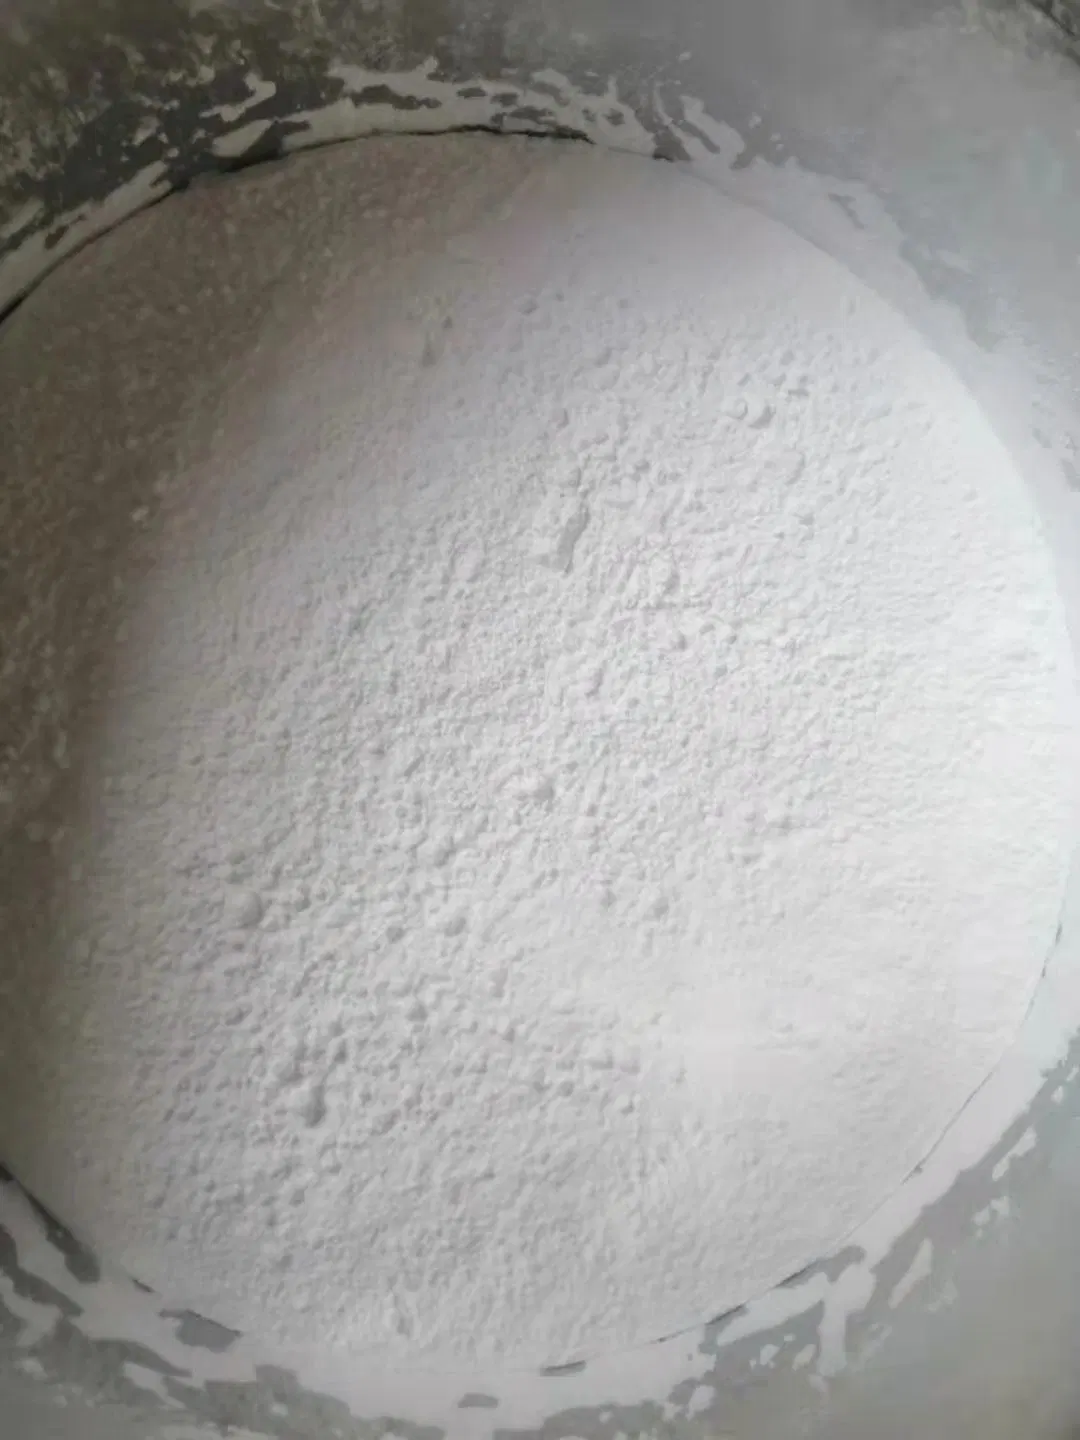 High Purity Thiamine Nitrate Powder CAS 532-43-4 with Safe Delivery